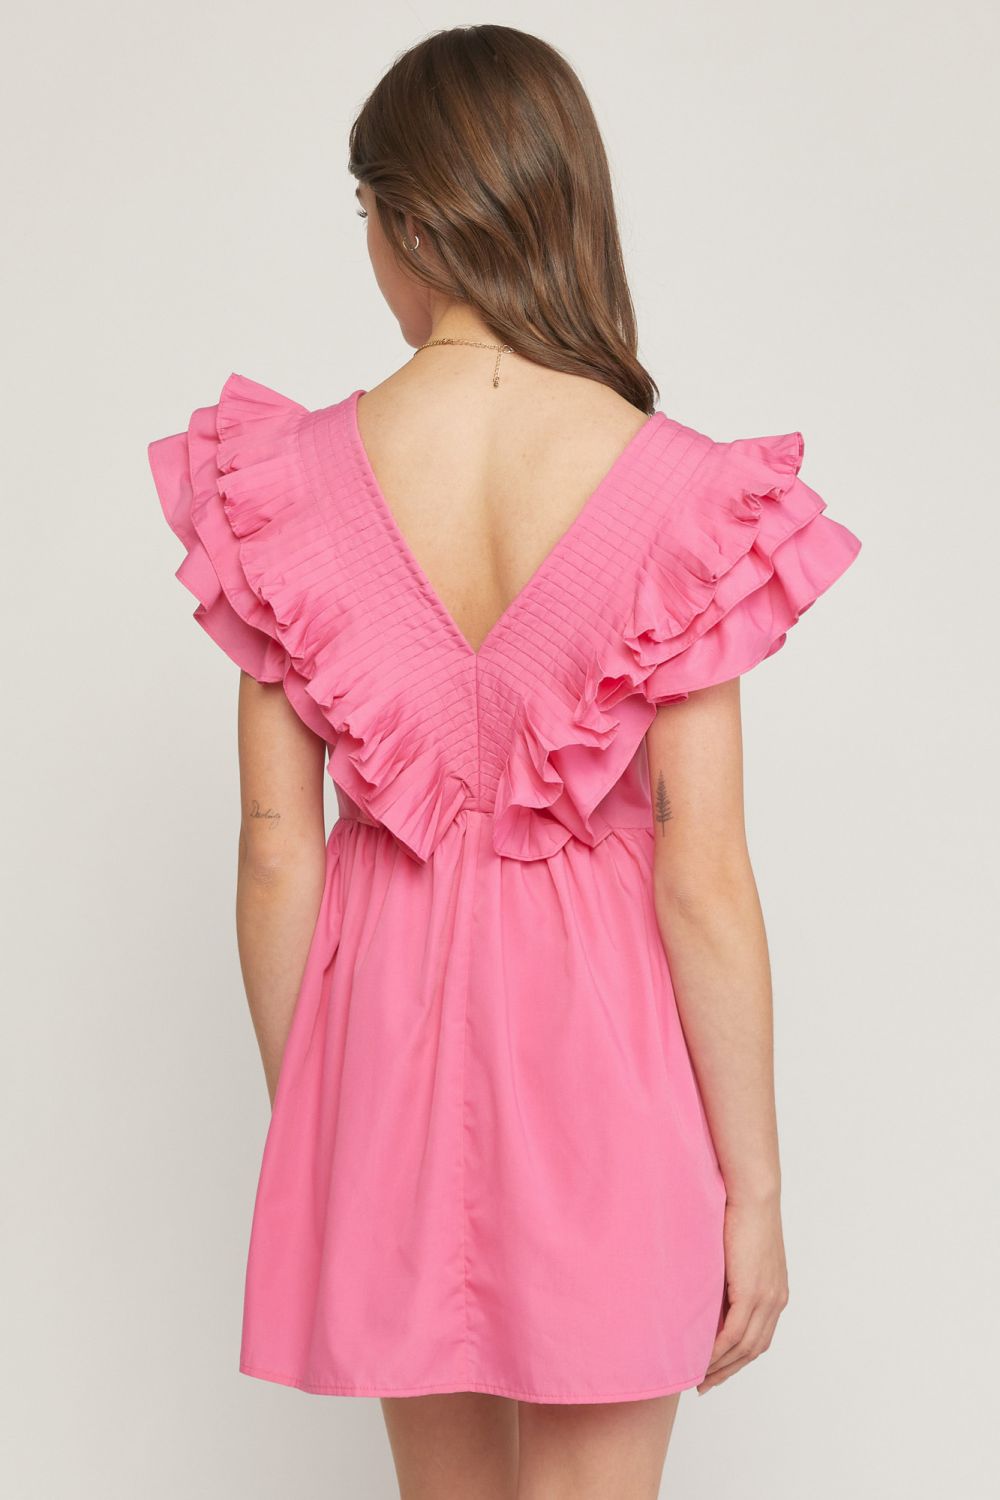 Spread Your Wings Dress - Pink